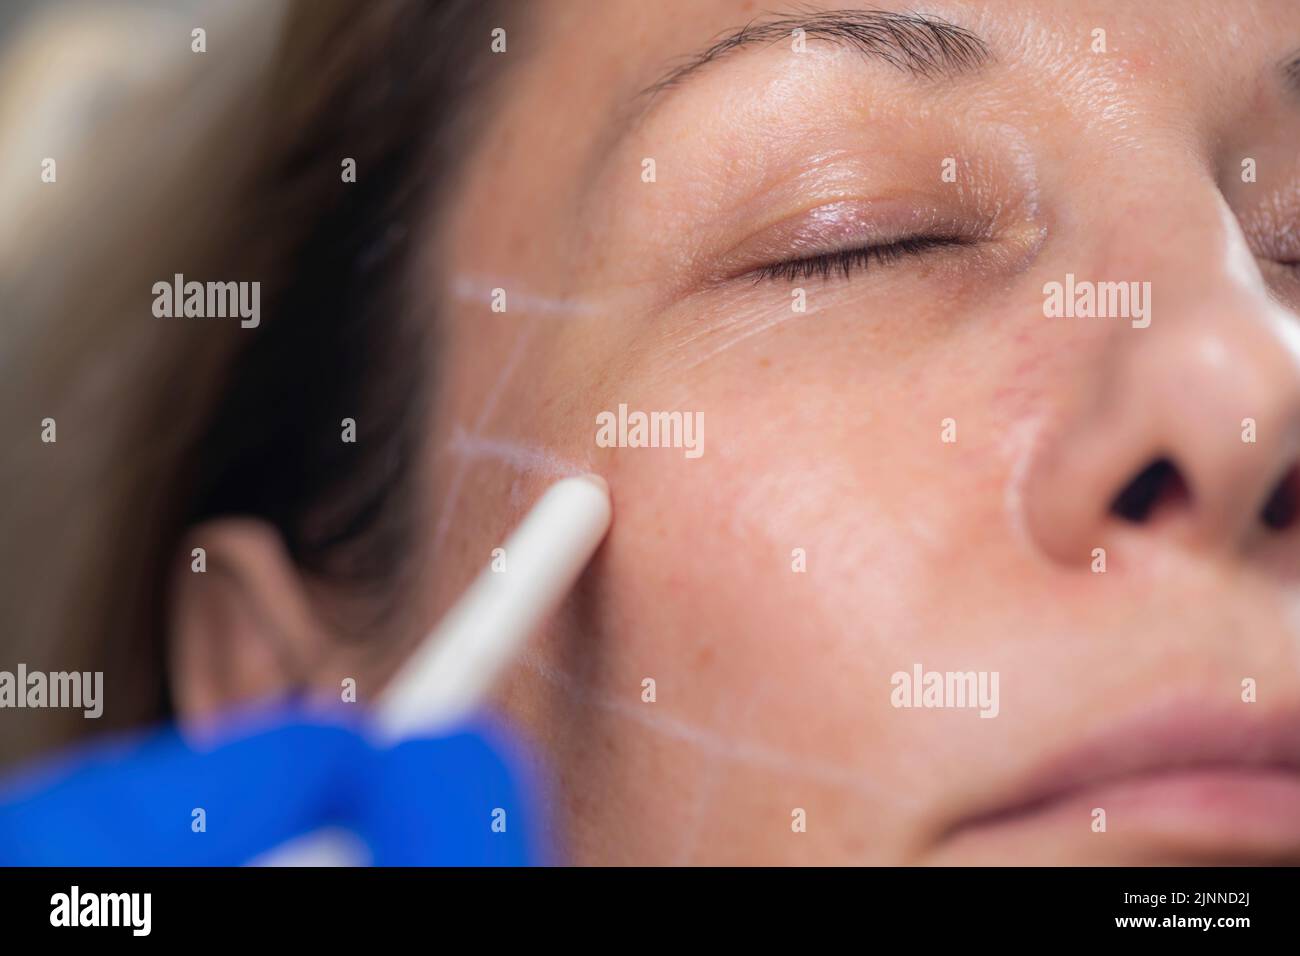 Mesotherapy thread face lift procedure Stock Photo